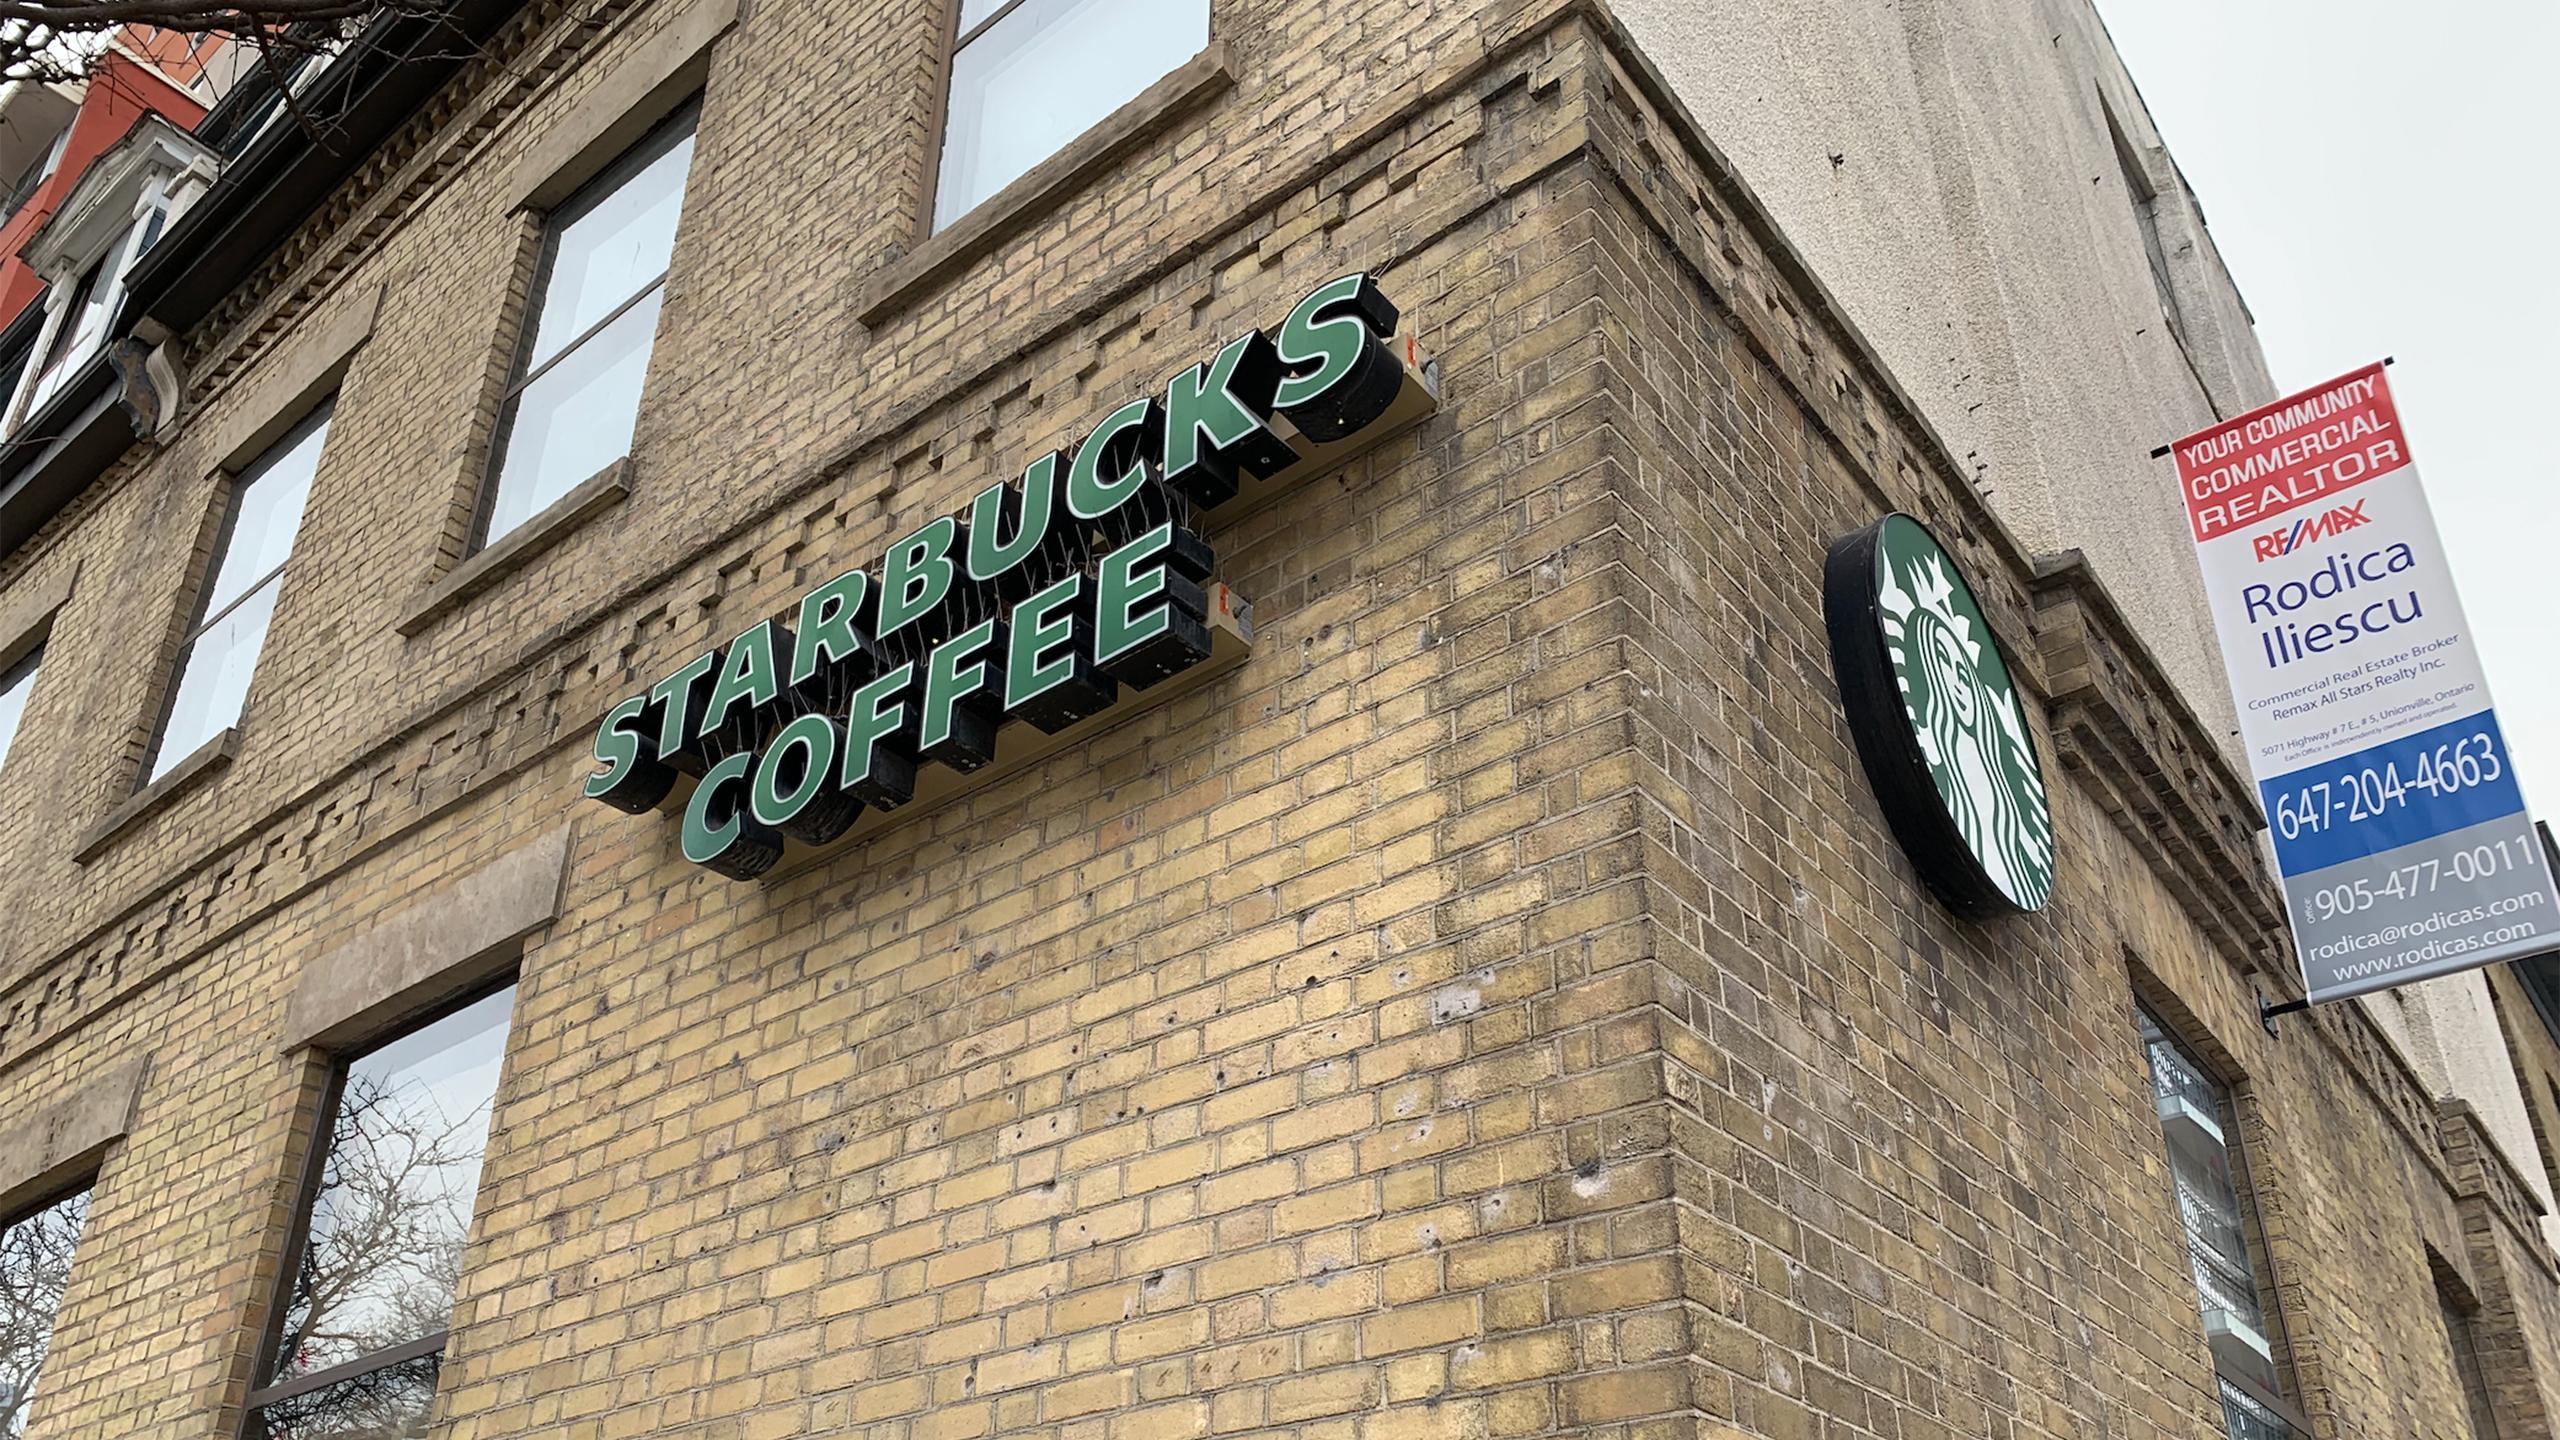 A Starbucks building with a realtor ad hanging on the wall.